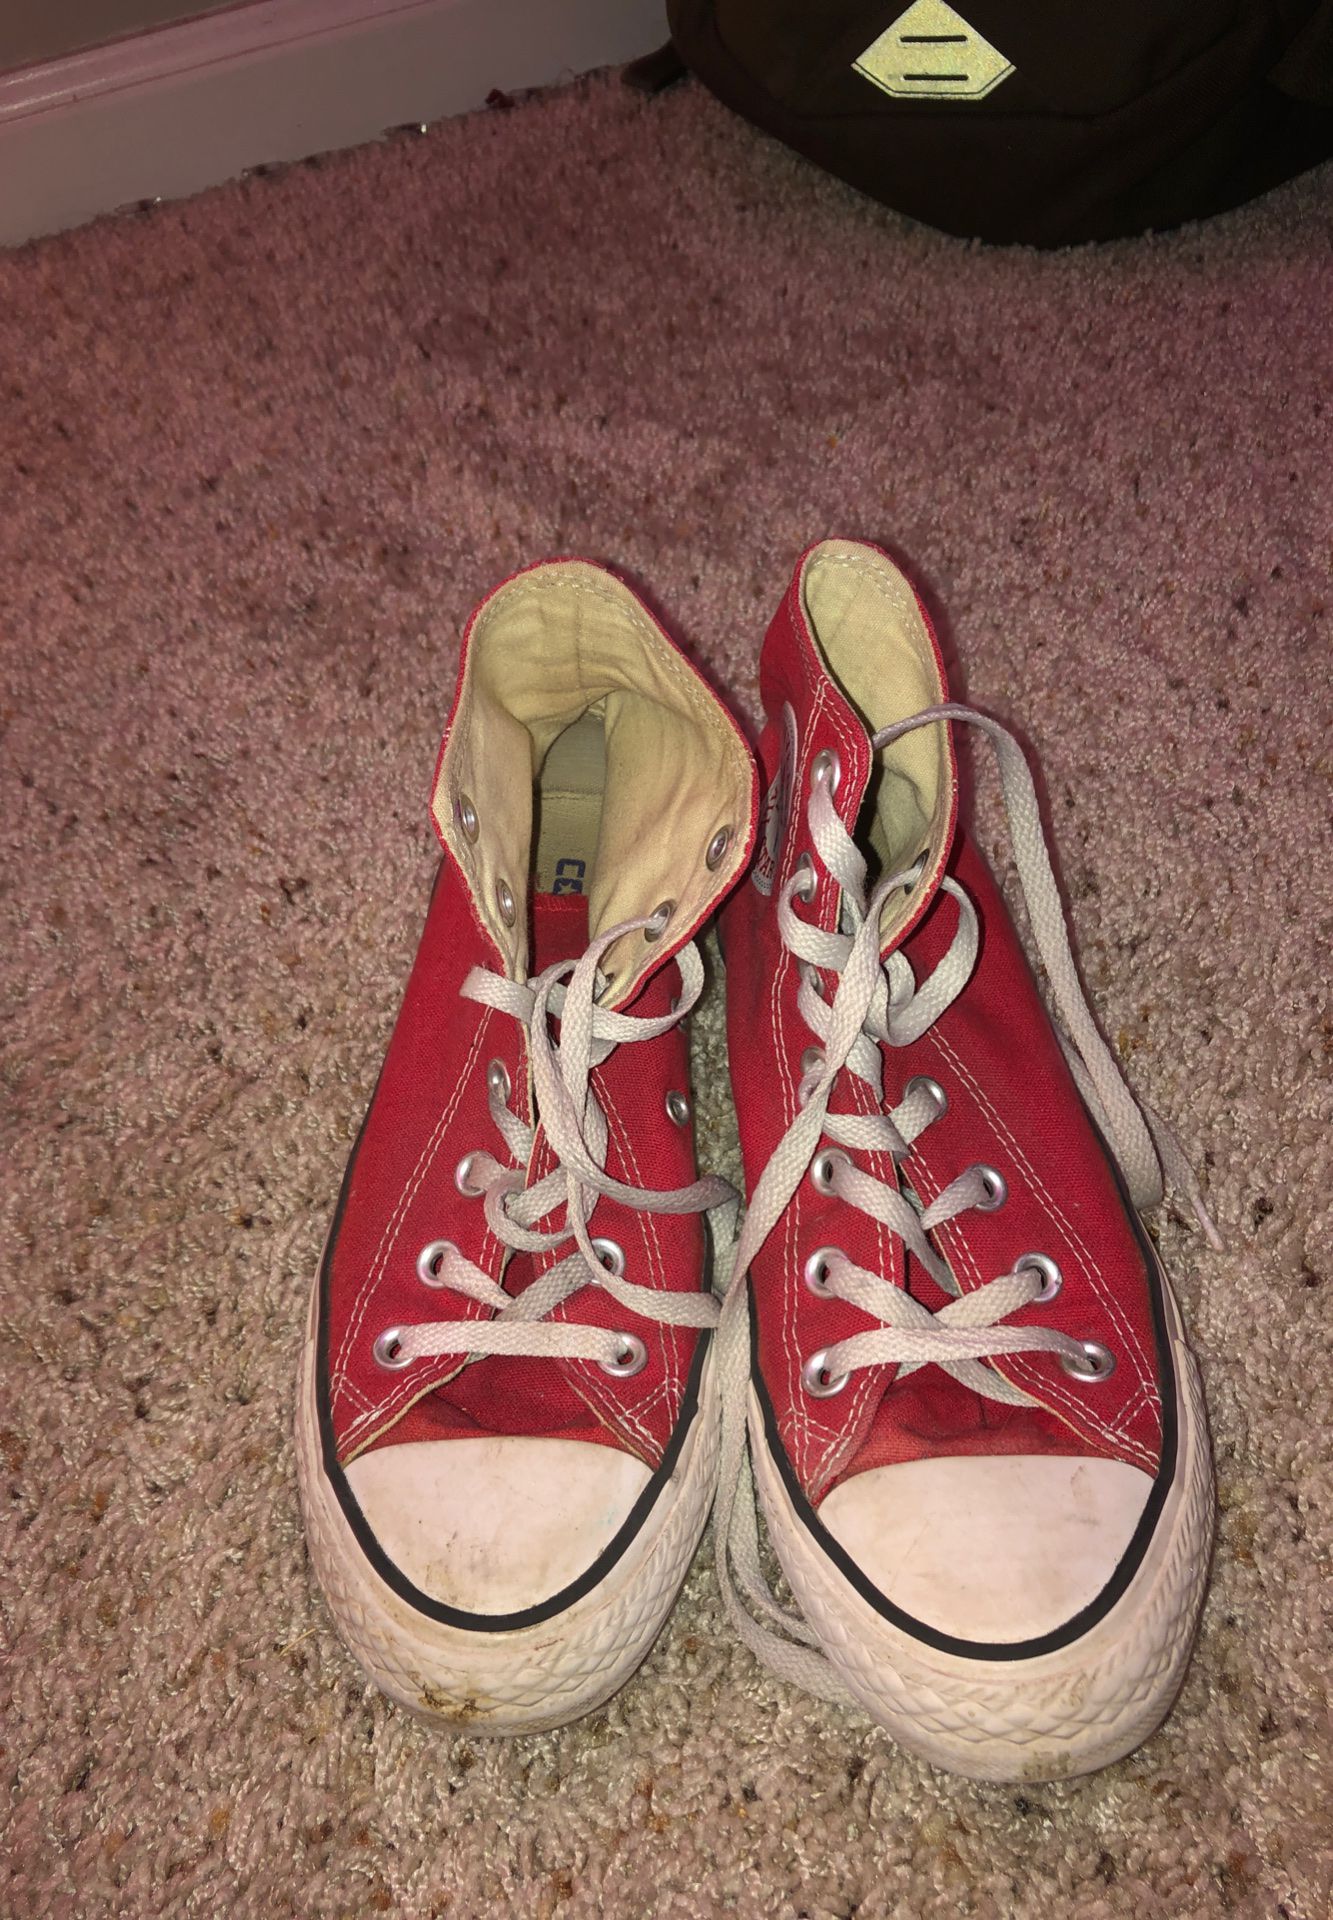 Red converse girls size 7